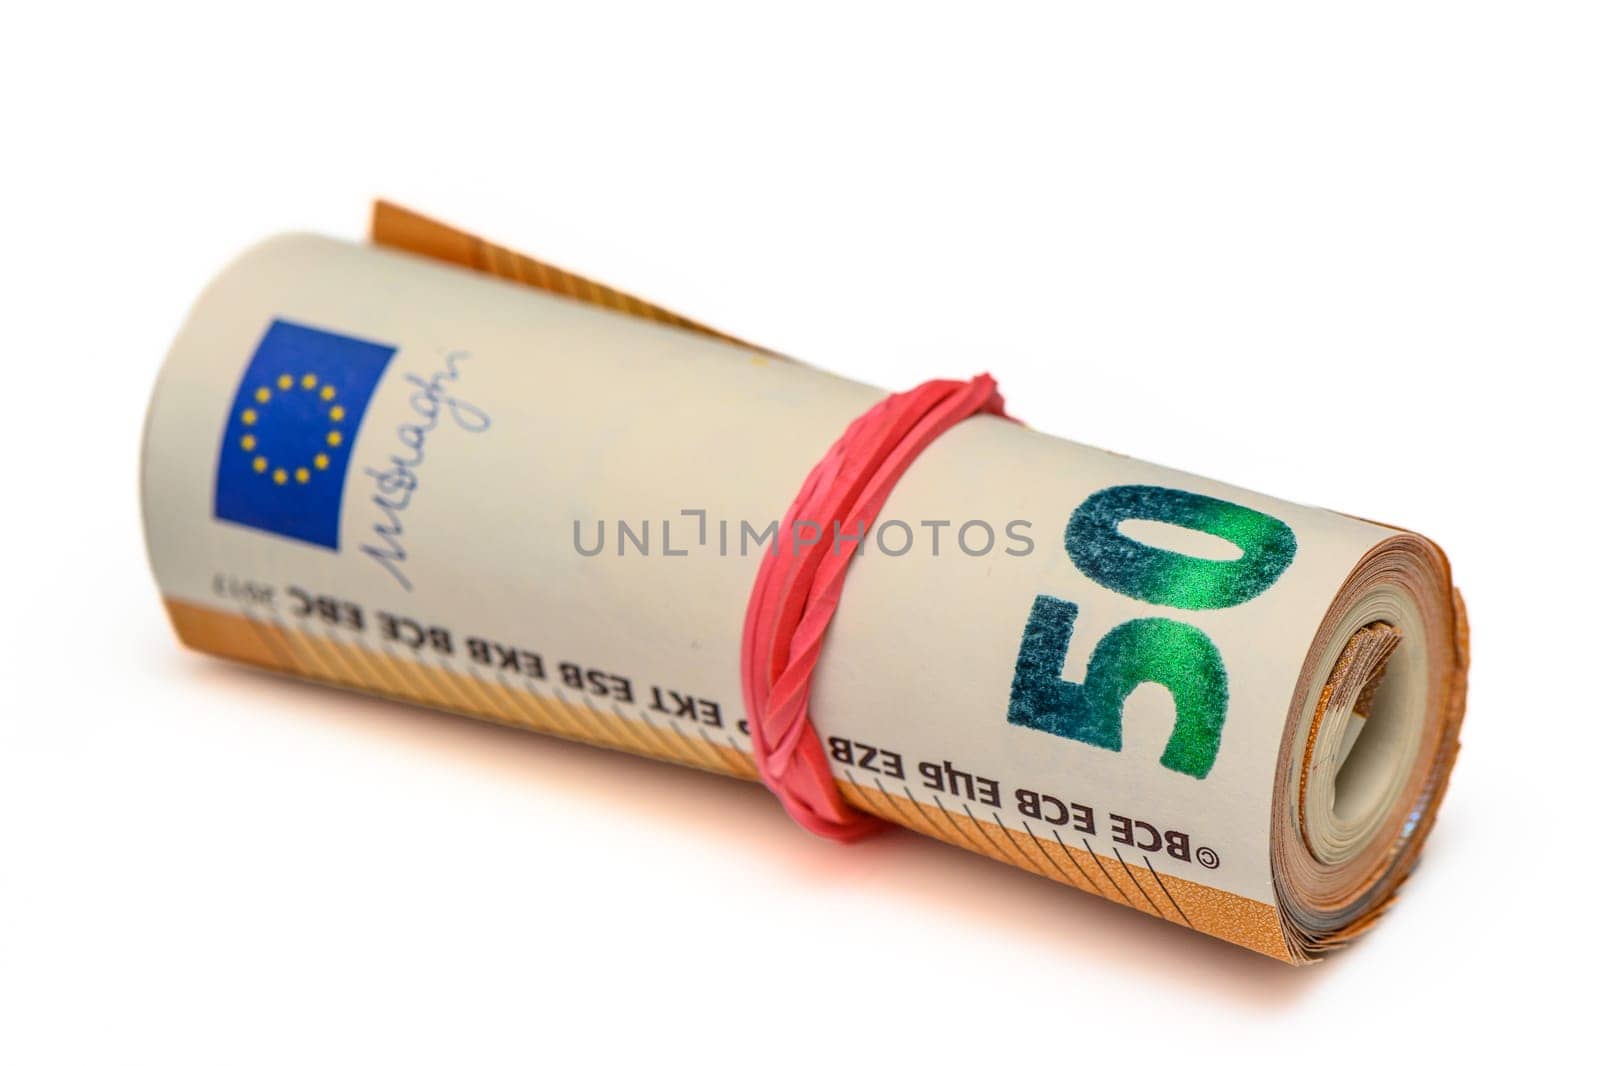 50 euro bills on white background rolled into a tube 17 by Mixa74